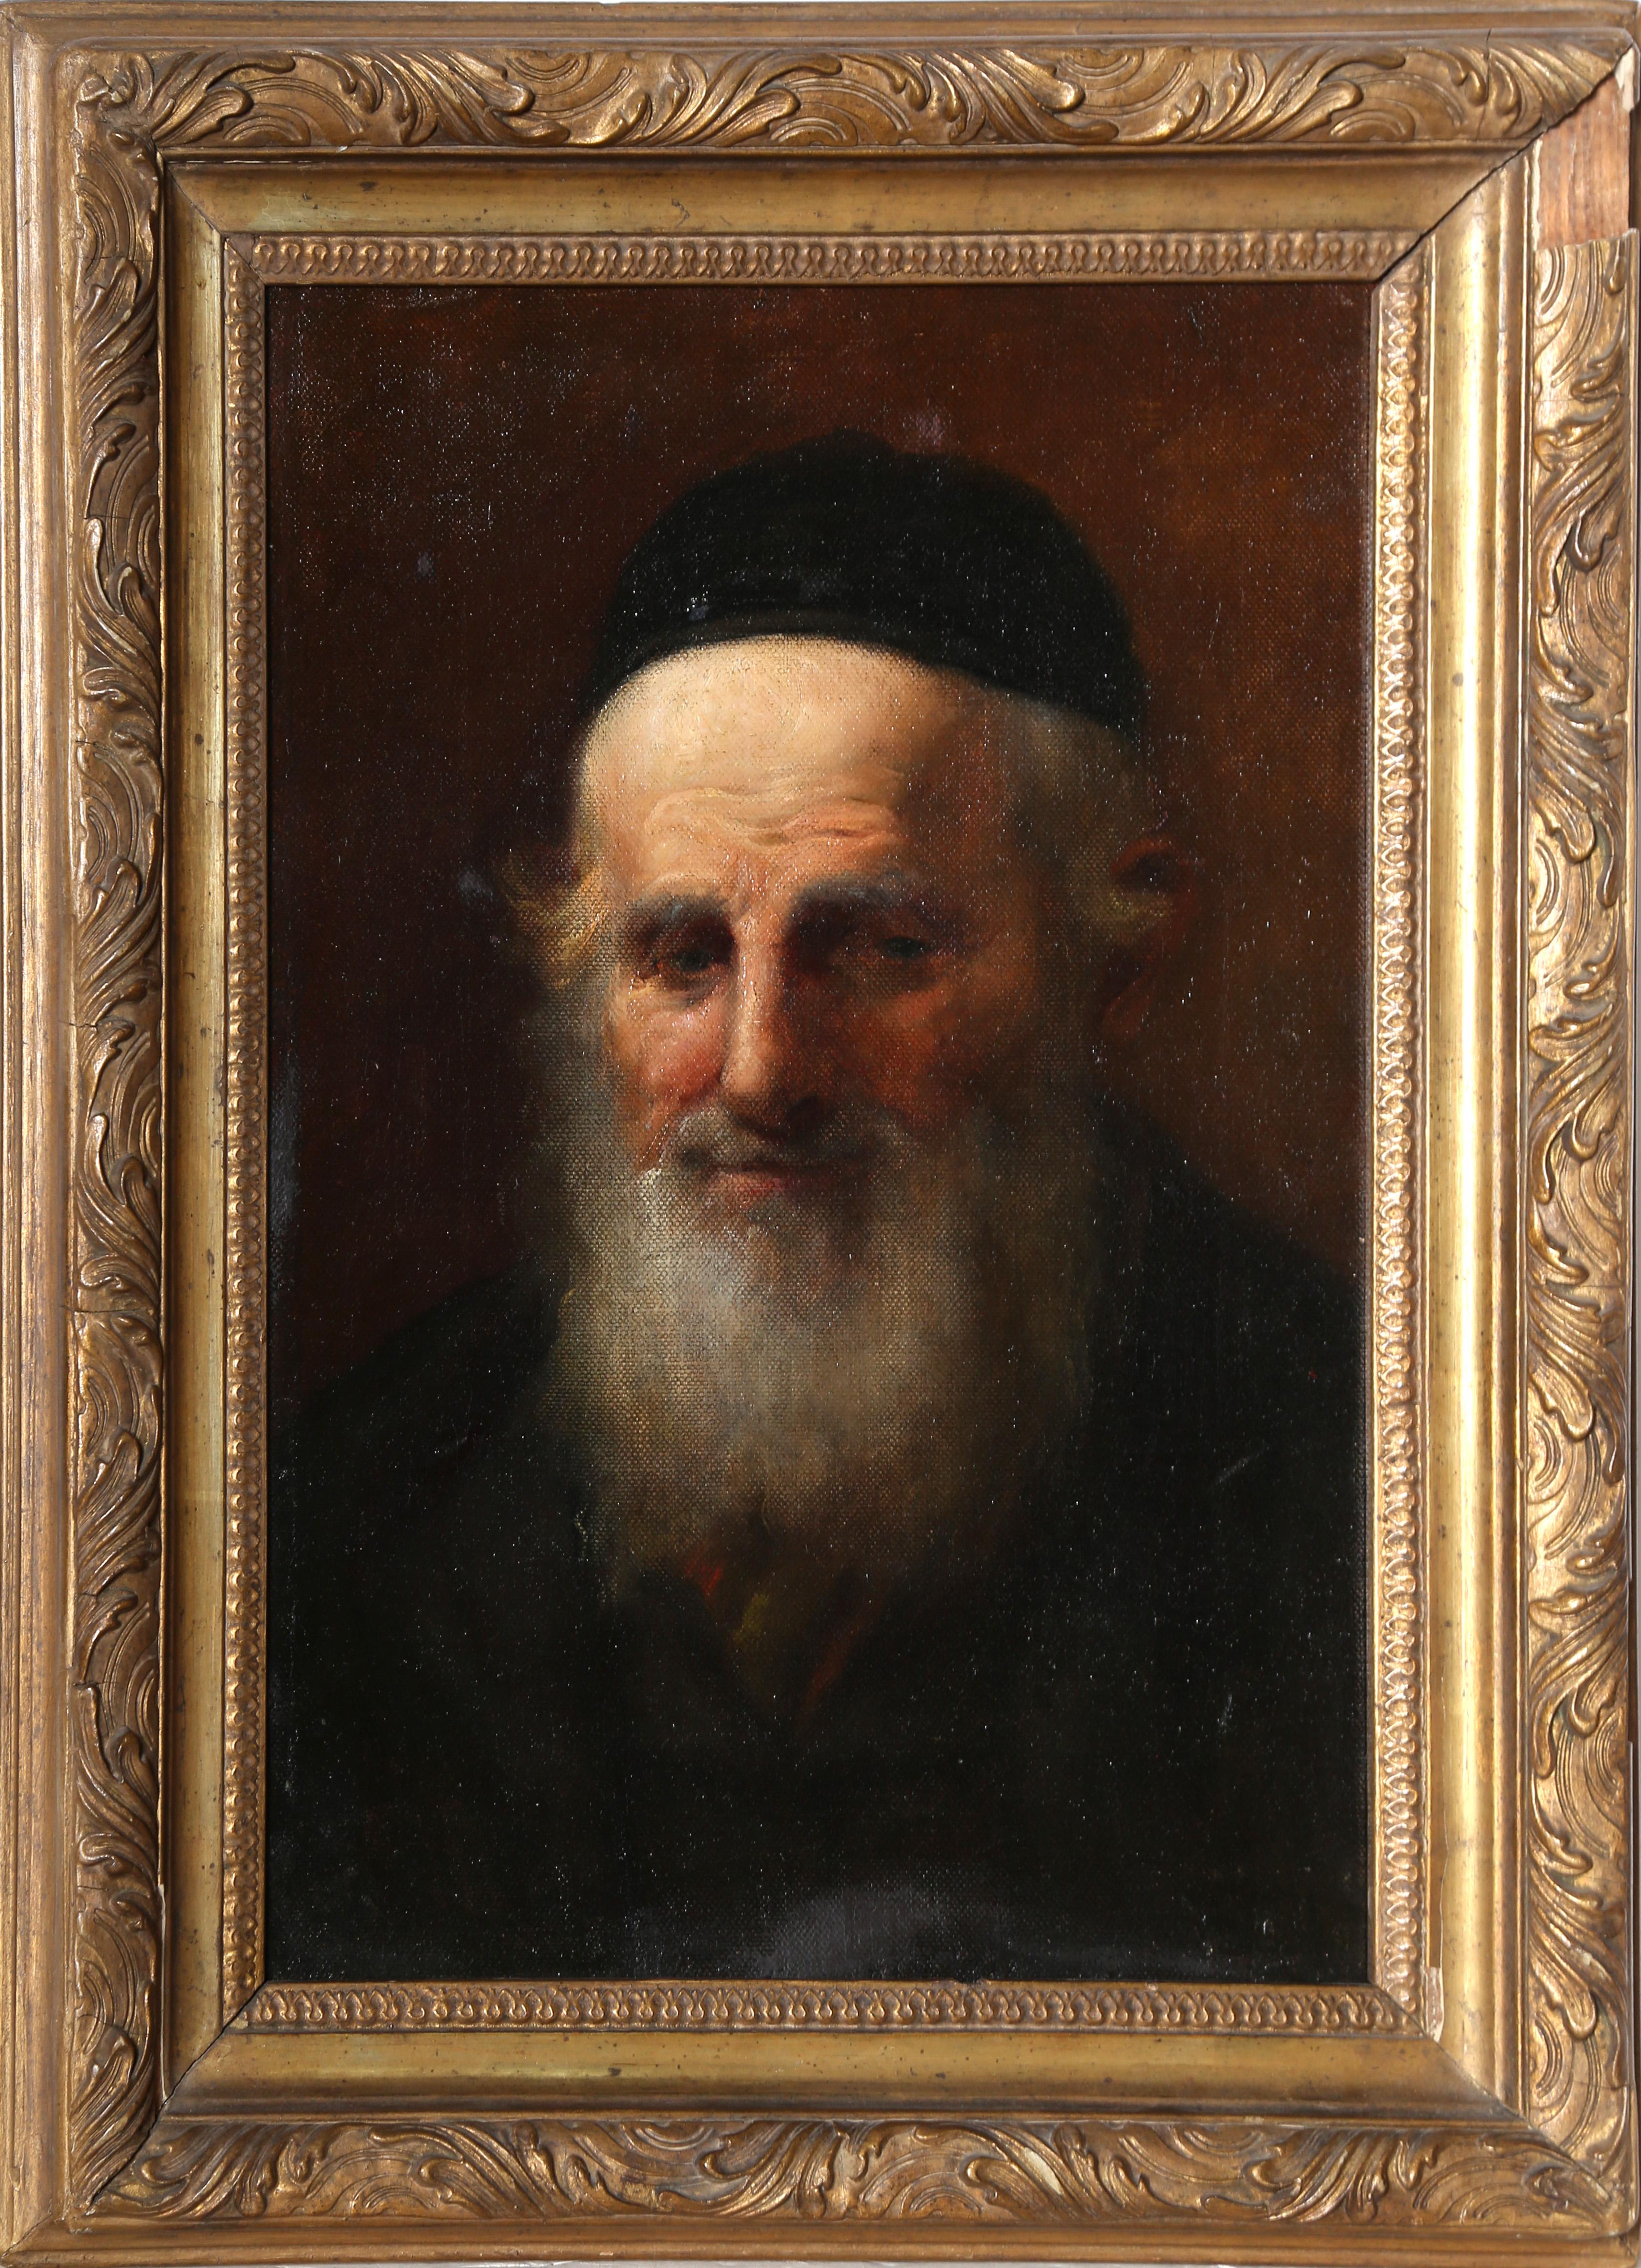 Unknown Portrait Painting - Portrait of a Rabbi, Framed Judaica Oil Painting